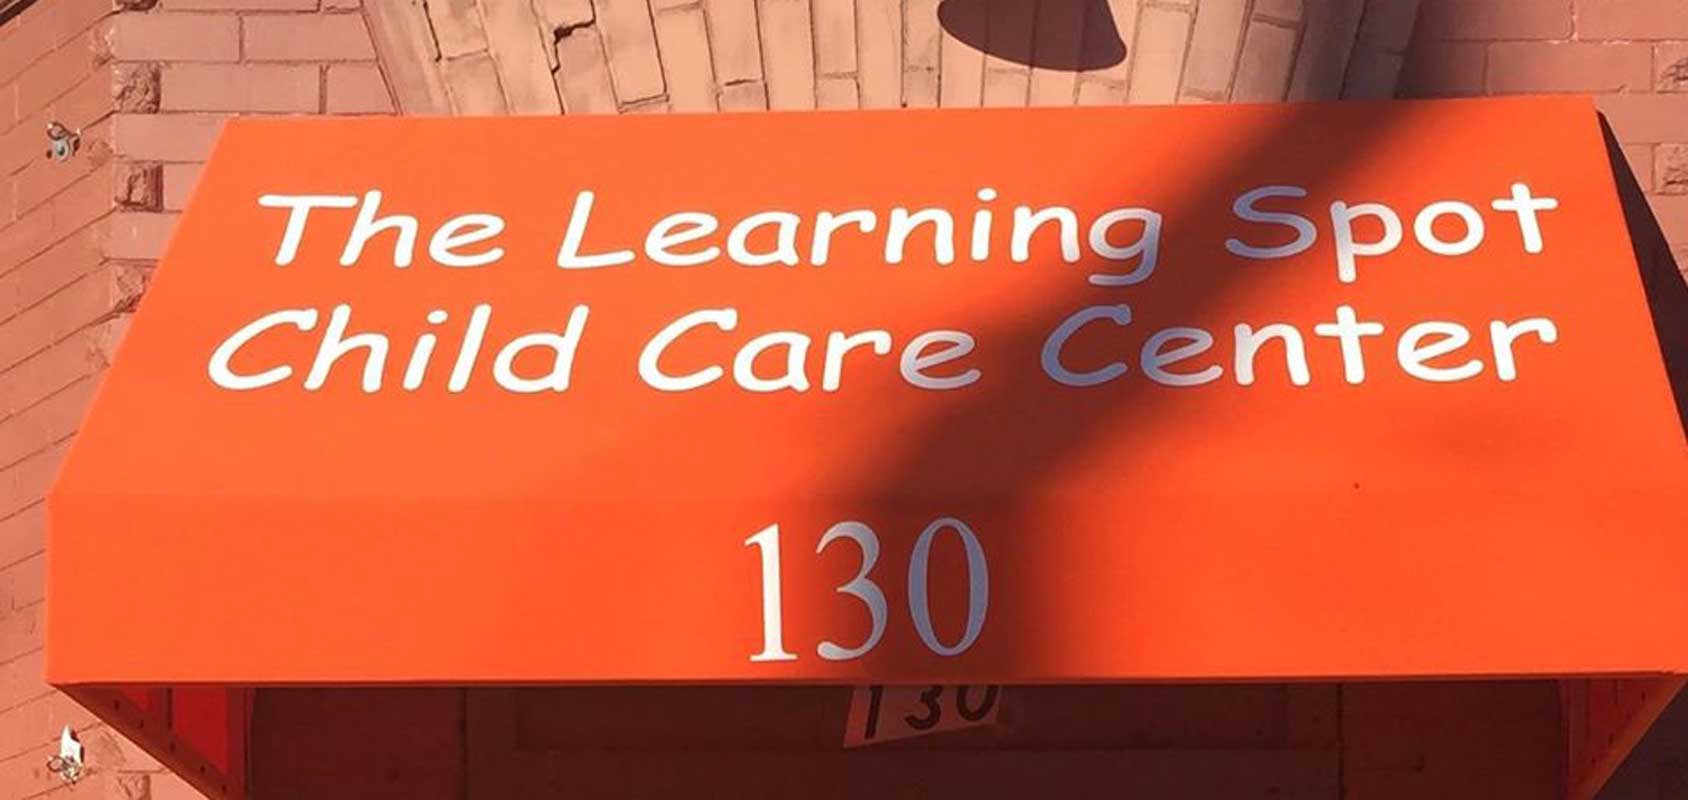 The Learning Spot Child Care